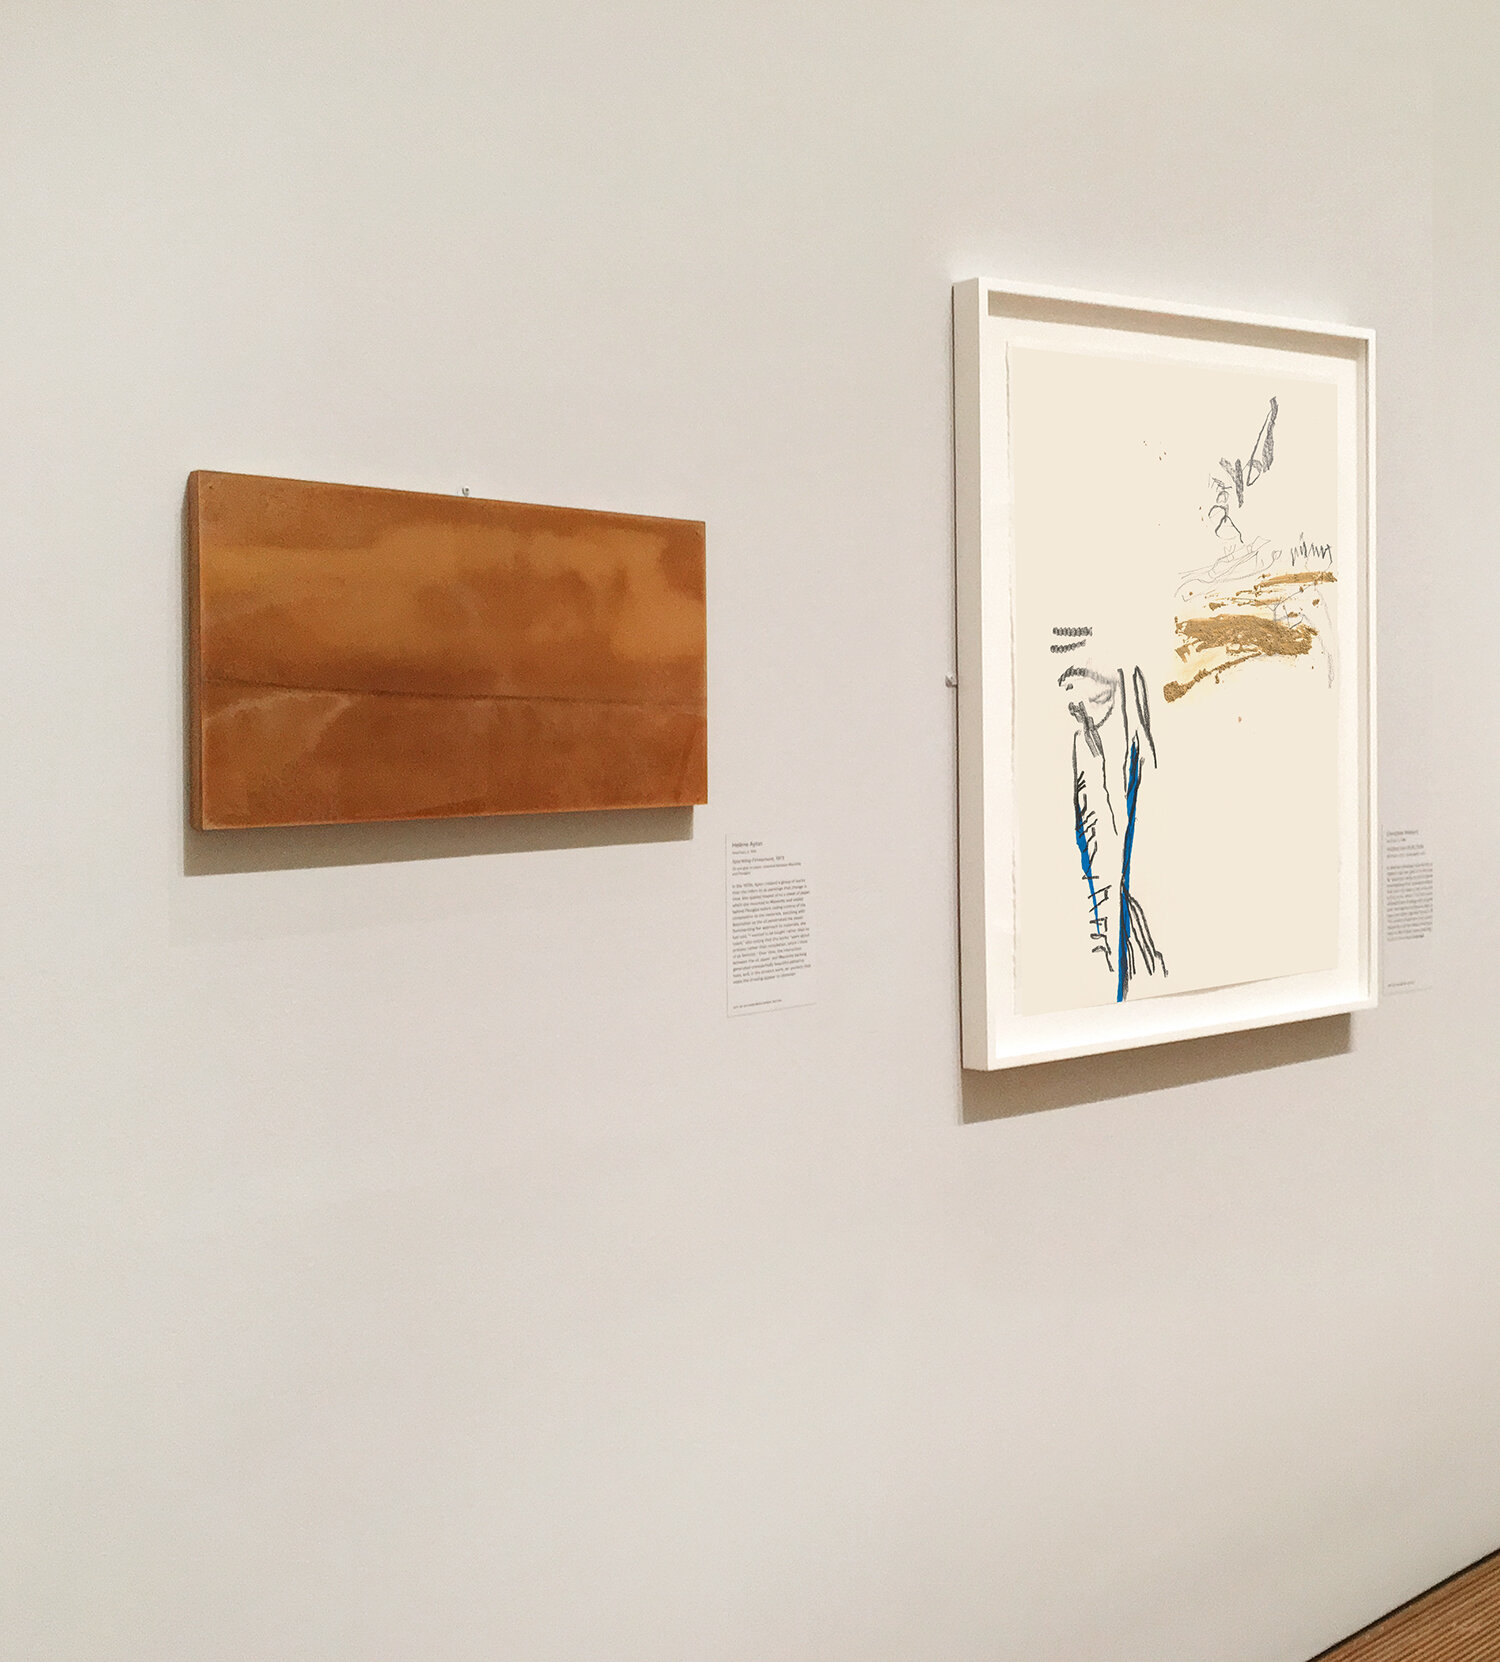  Installation view of  By Any Means: Contemporary Drawings from the Morgan  Morgan Library and Museum, 2019 